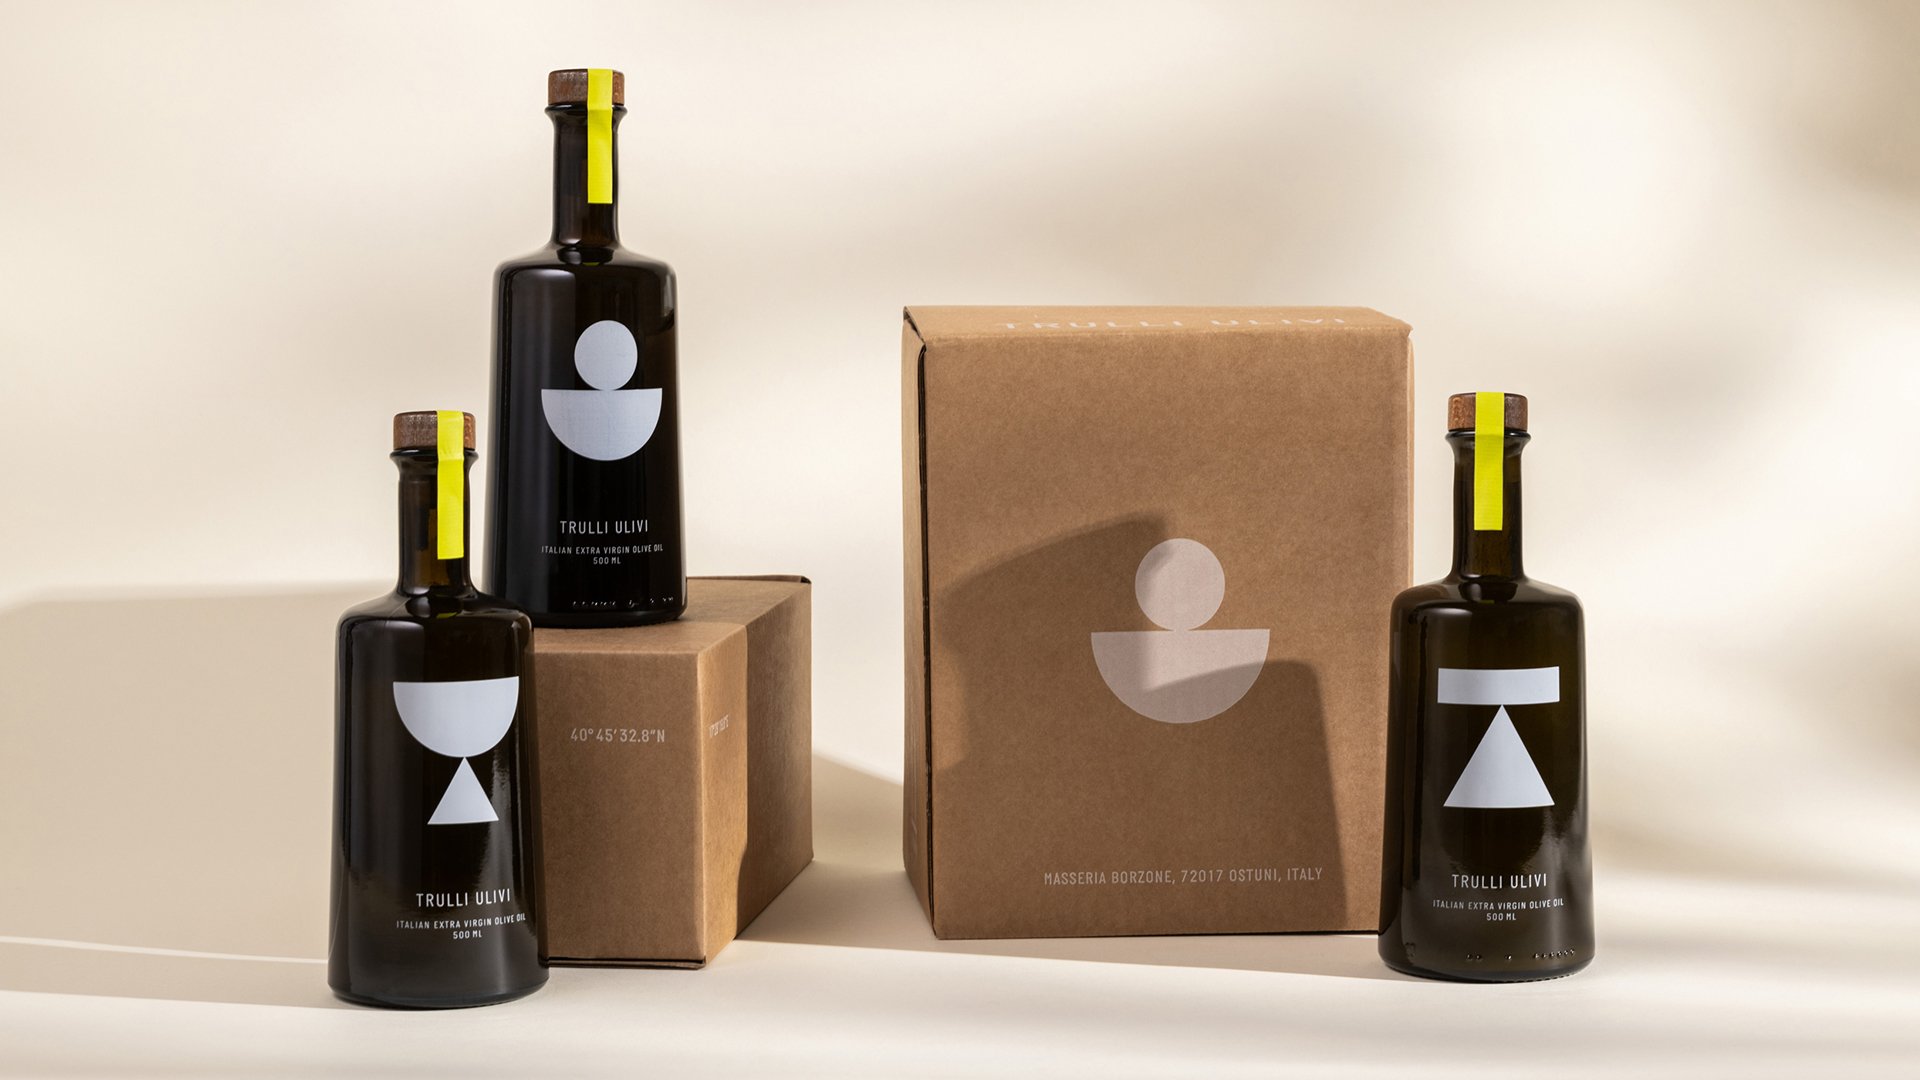 Logotype, typeface, photography, motion graphics and packaging by Here Design for Italian olive oil producer Trulli Ulivi.